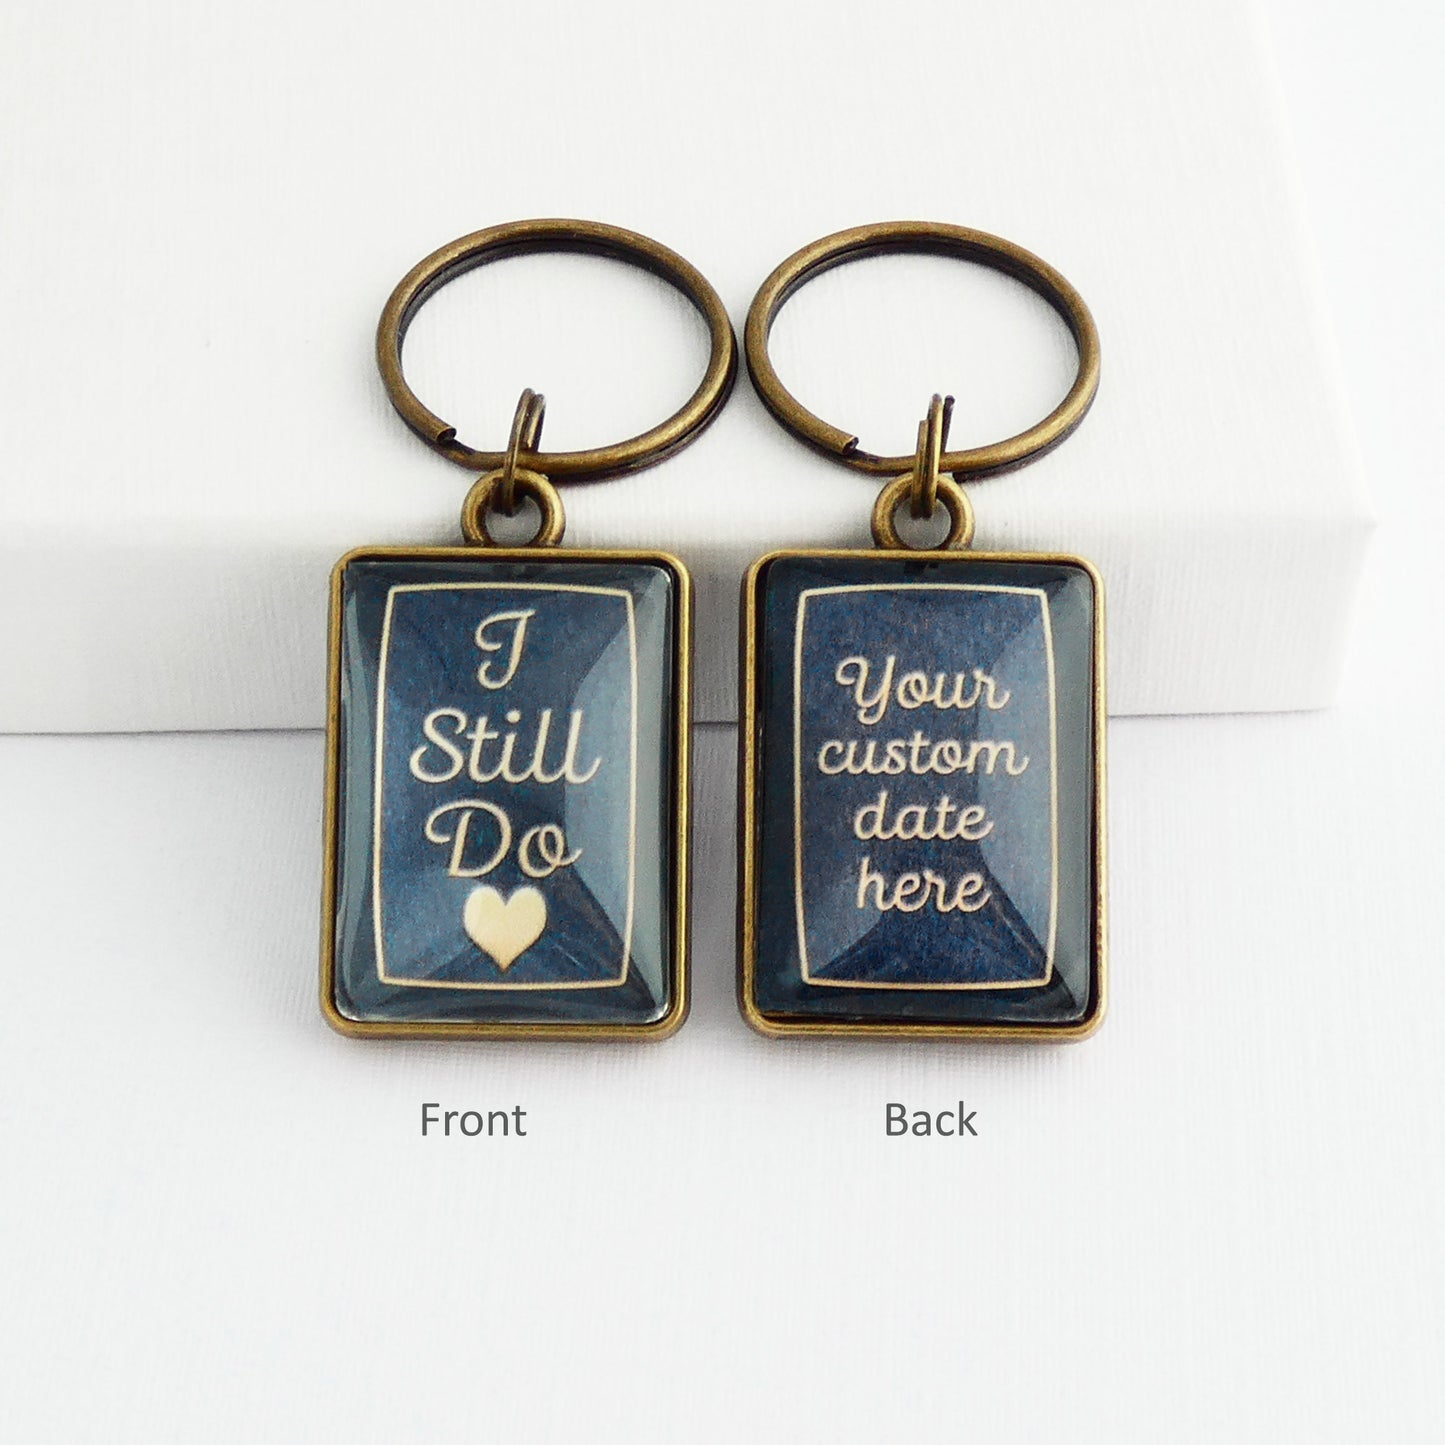 A double sided bronze and navy blue rectangle keyrings with the words I still do on the front and a personalised custom date on the back